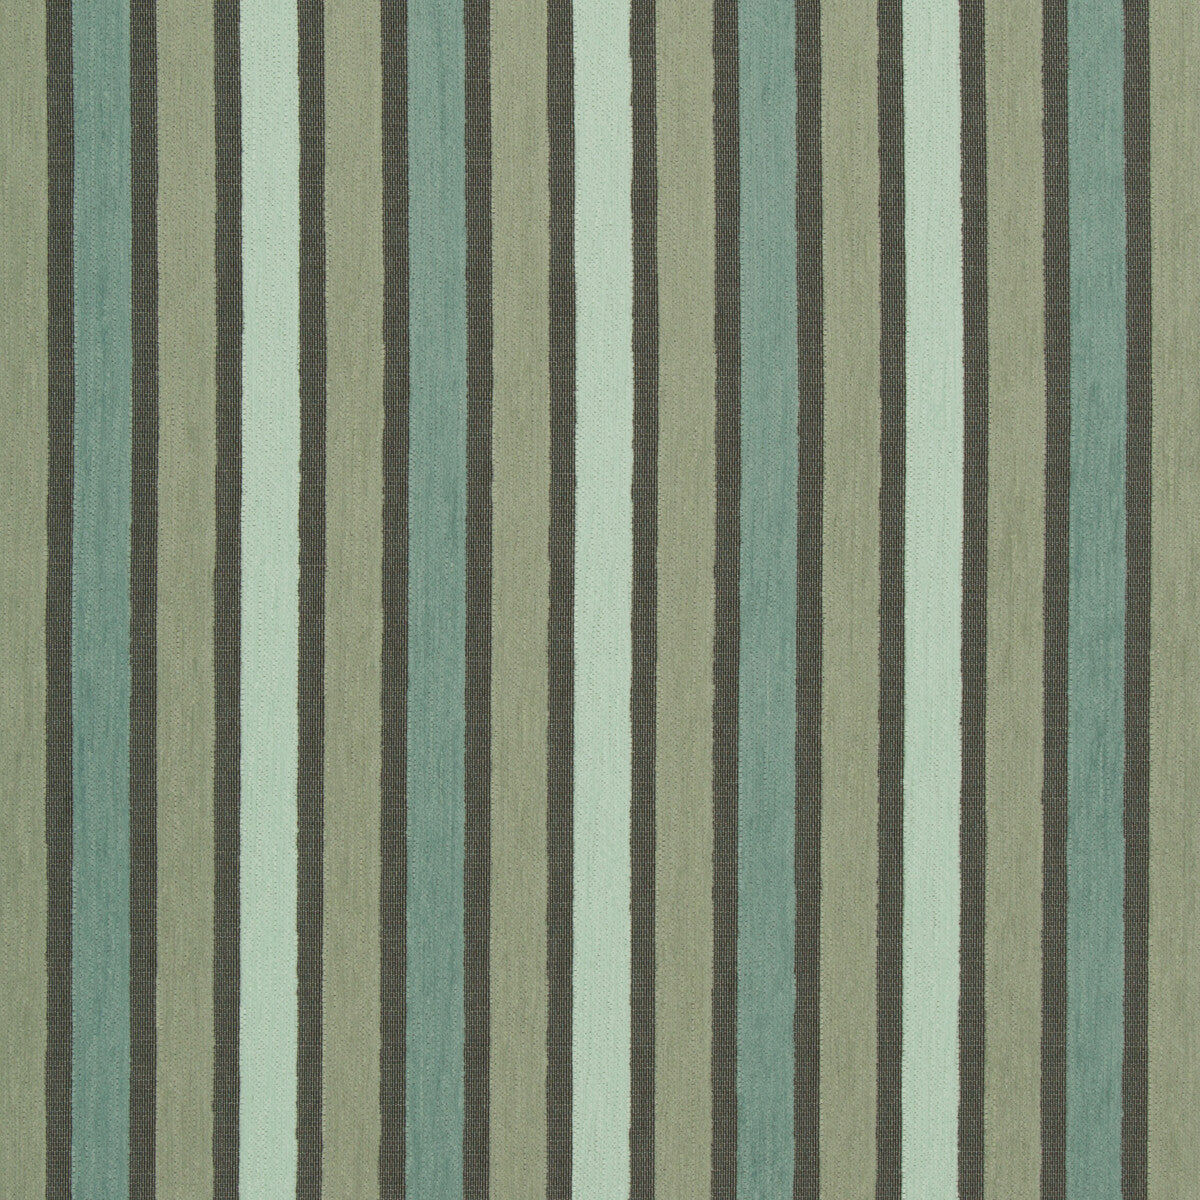 Guru fabric in tidal color - pattern 35083.23.0 - by Kravet Contract in the Gis Crypton collection